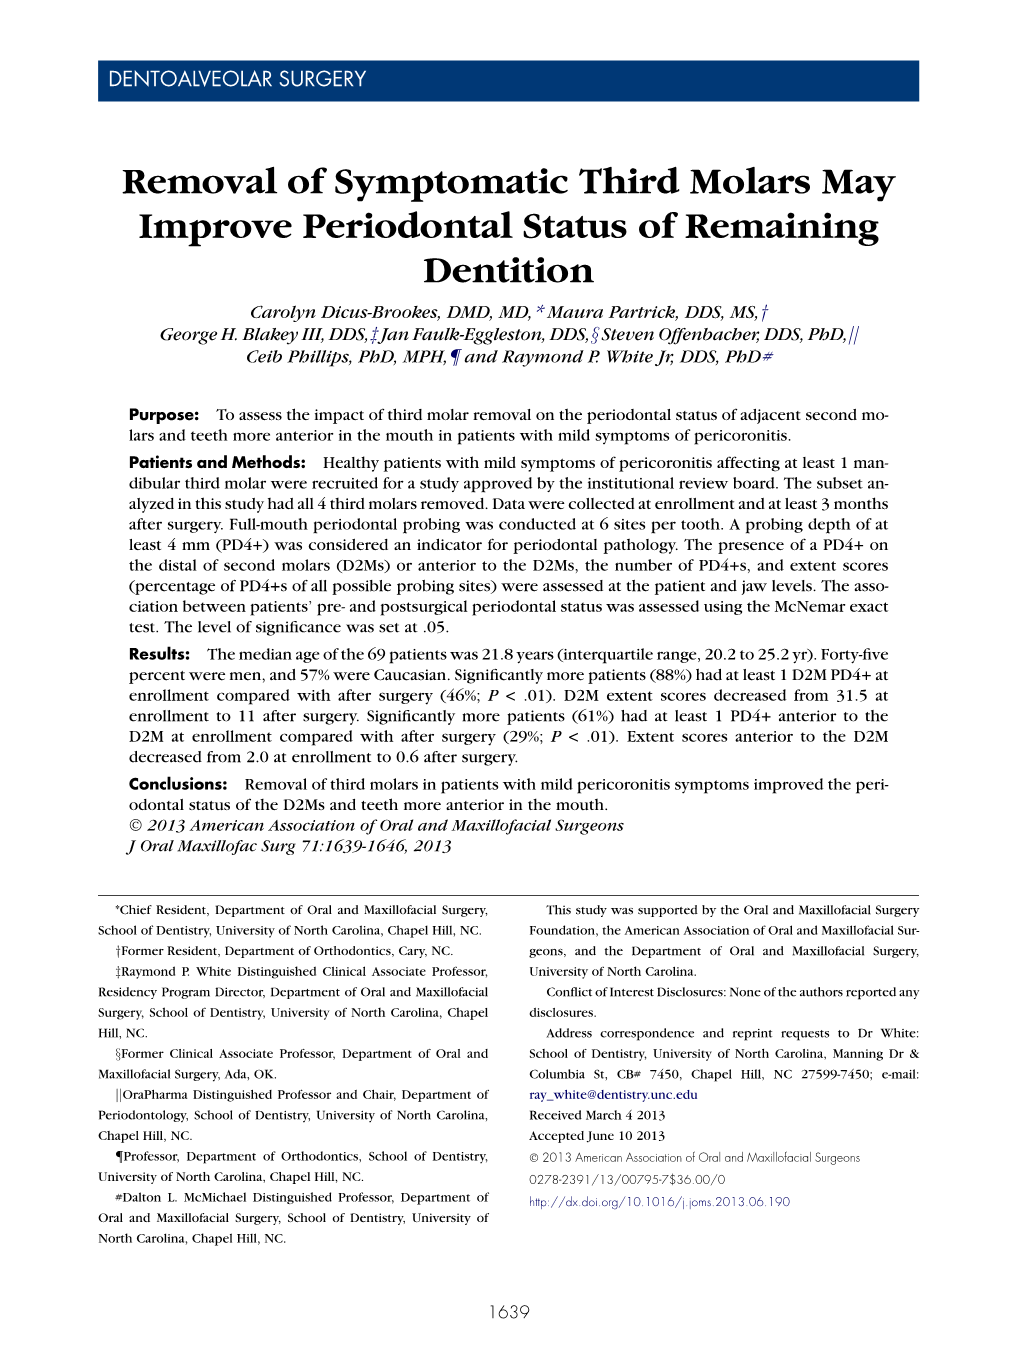 Removal of Symptomatic Third Molars May Improve Periodontal Status of Remaining Dentition Carolyn Dicus-Brookes, DMD, MD,* Maura Partrick, DDS, MS,Y George H